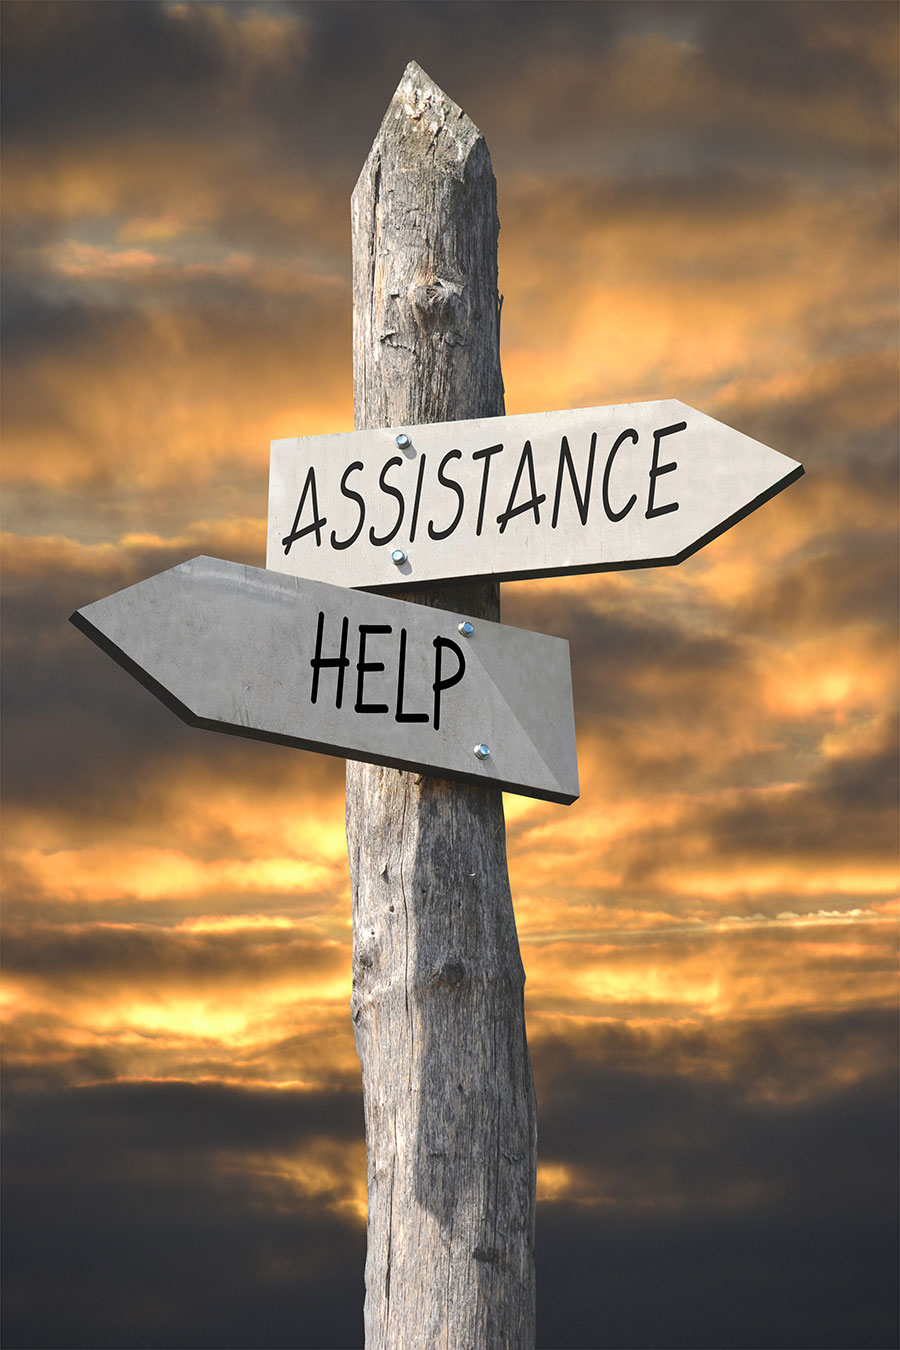 Colorado mental health assistance and help